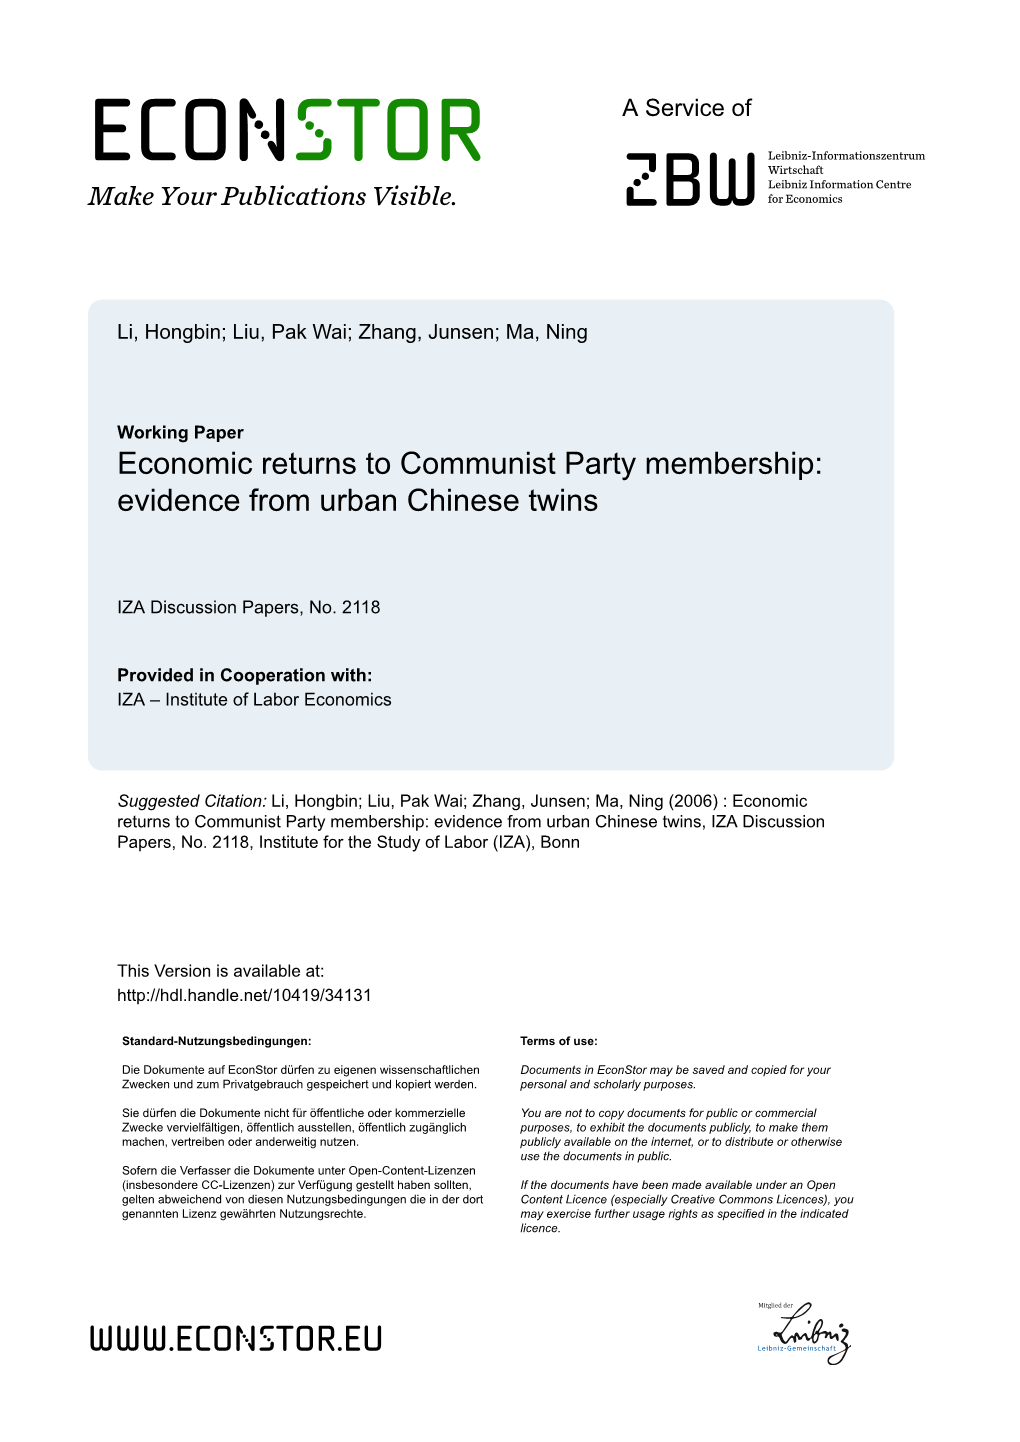 Economic Returns to Communist Party Membership: Evidence from Urban Chinese Twins